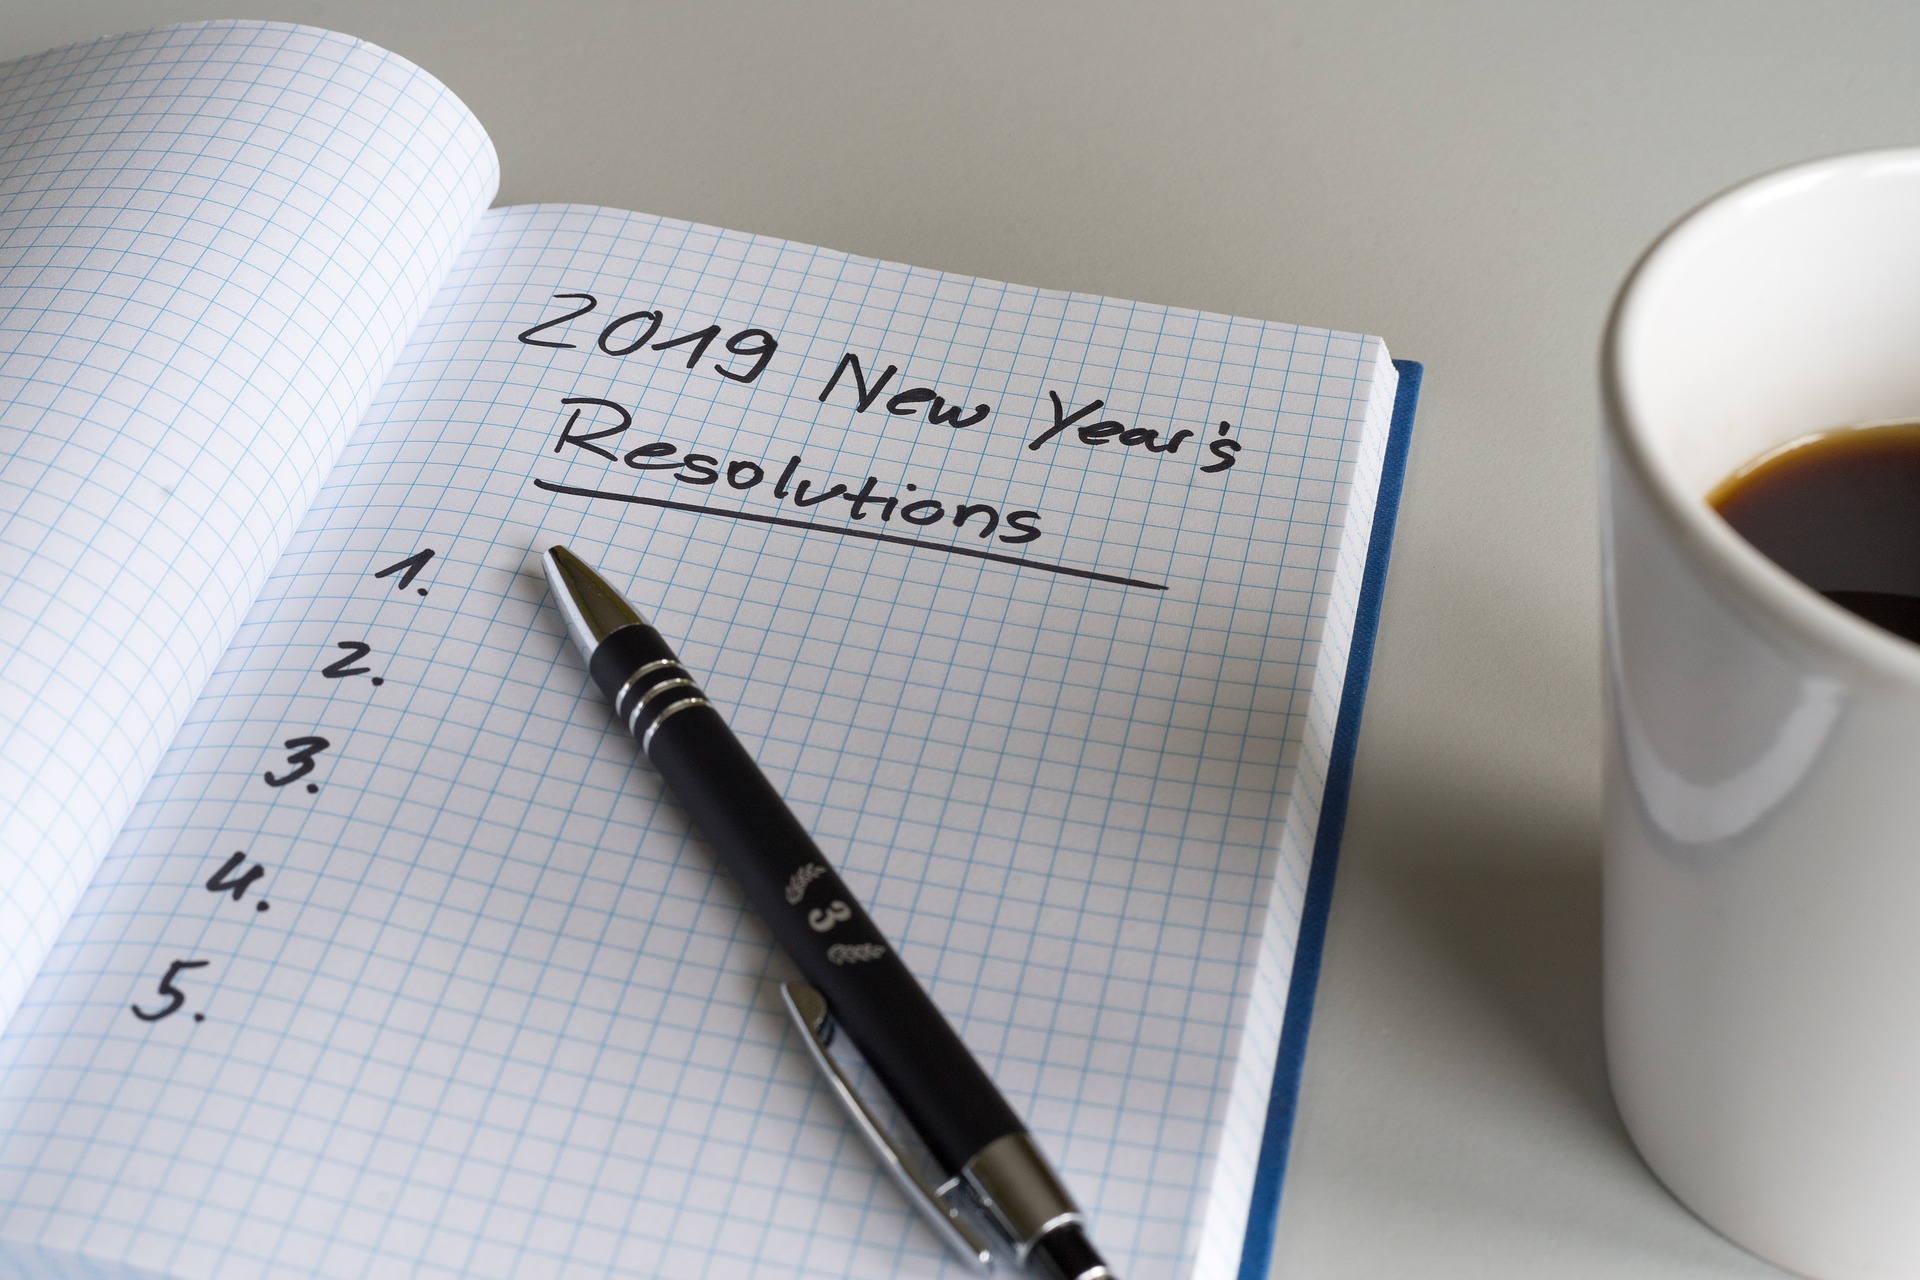 Habits and resolutions